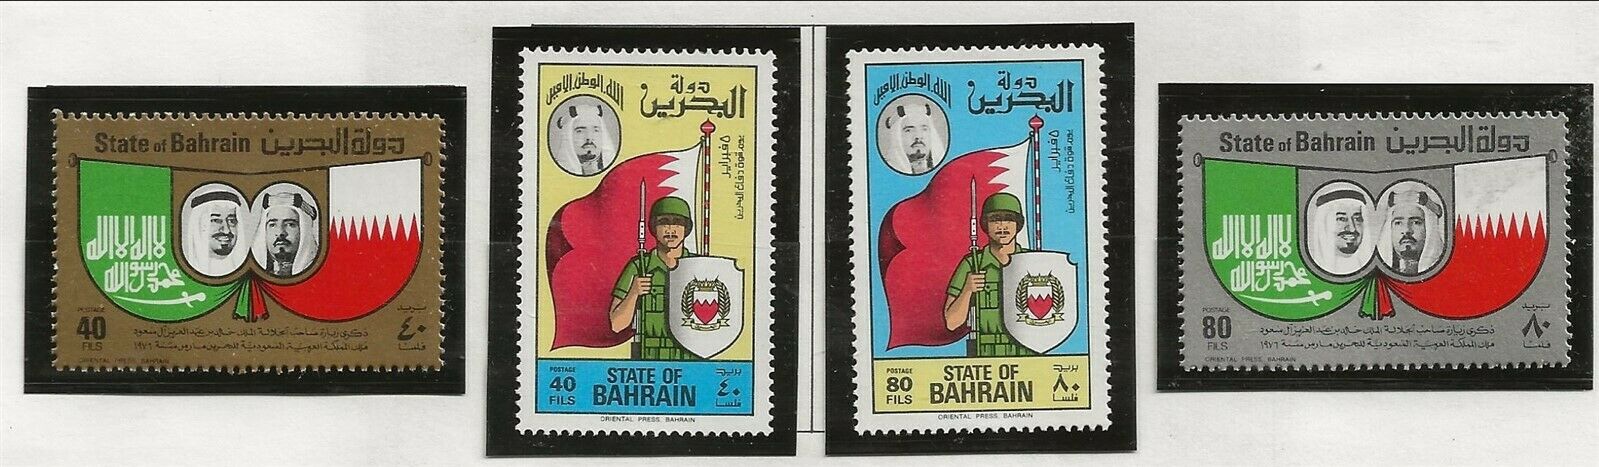 BAHRAIN Sc 248-51 NH issue of 1976 - ARMY